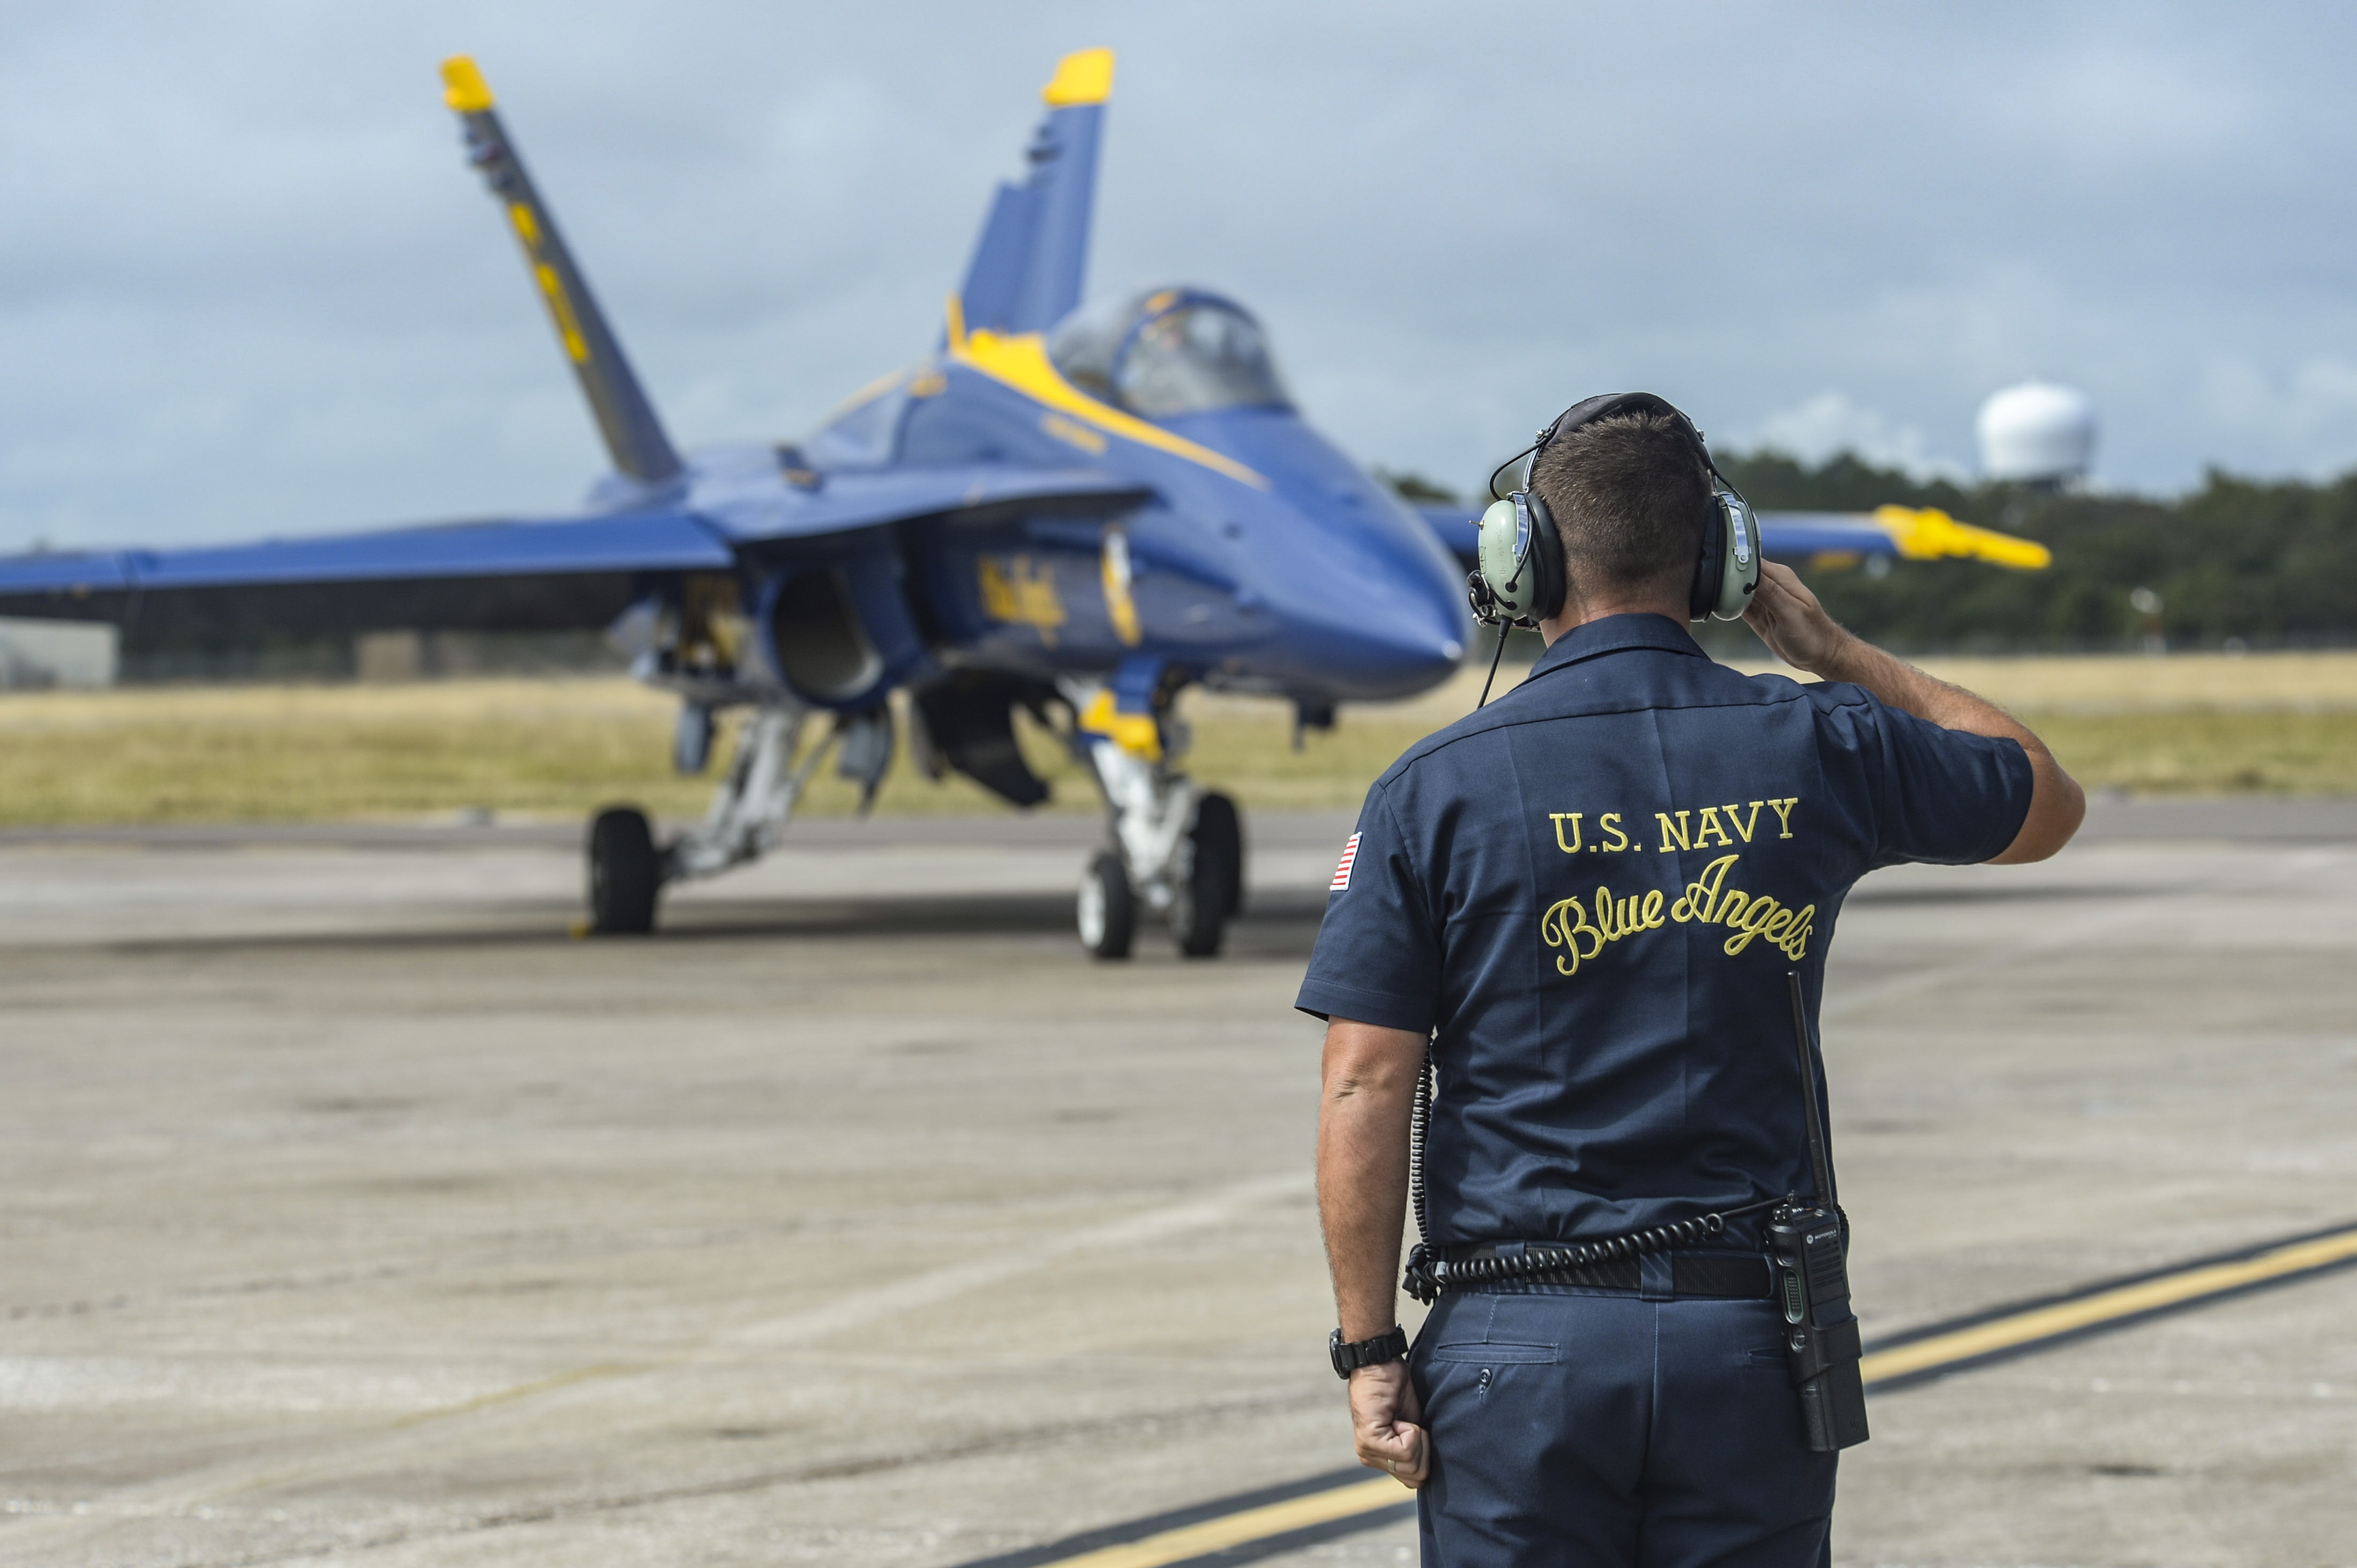 Blue Angels leaders reflect on team's 70th anniversary